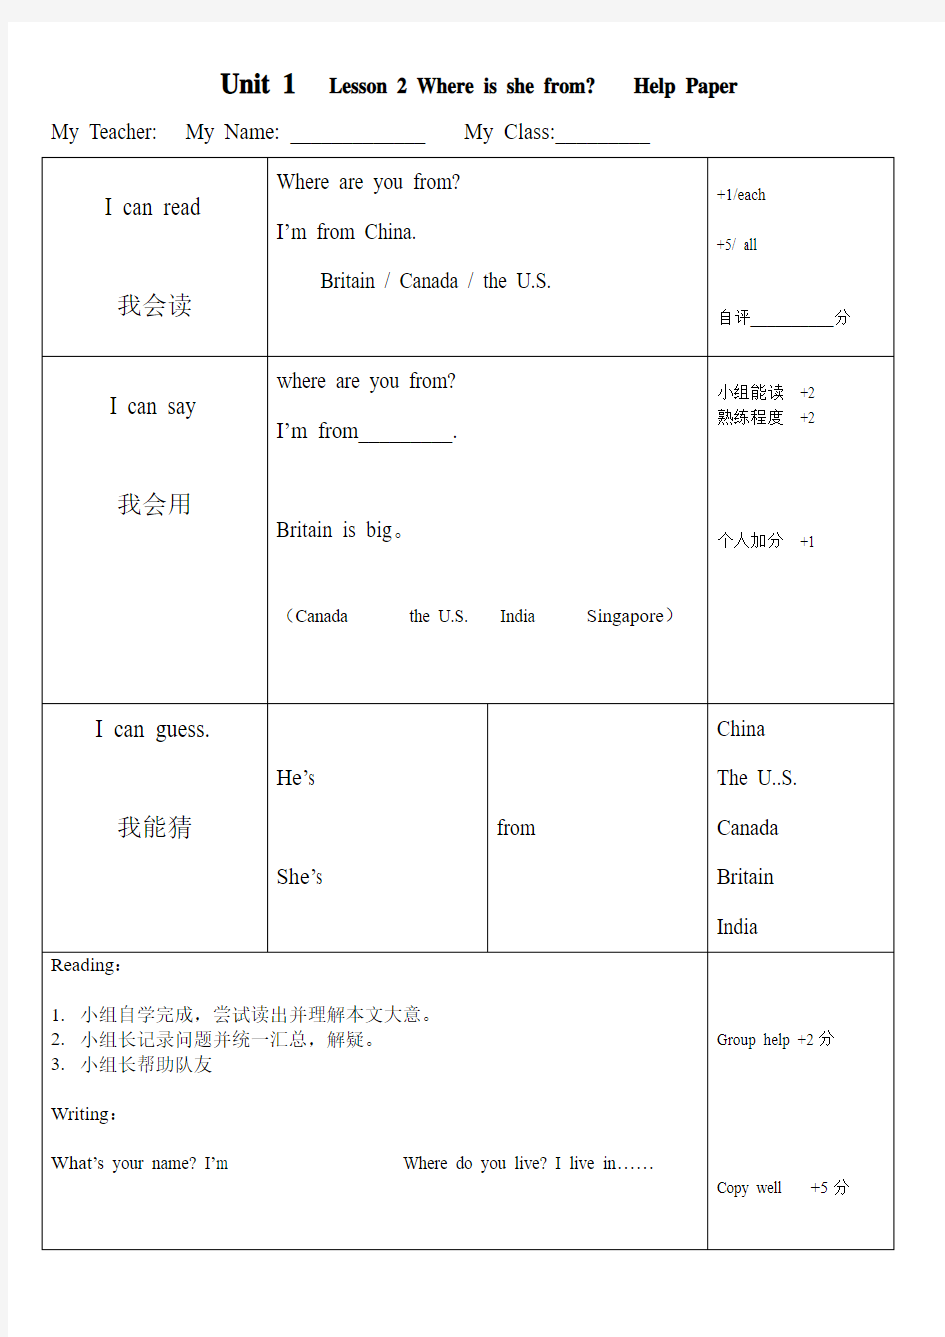 Unit 1 Lesson 2 Where is she from_导学案